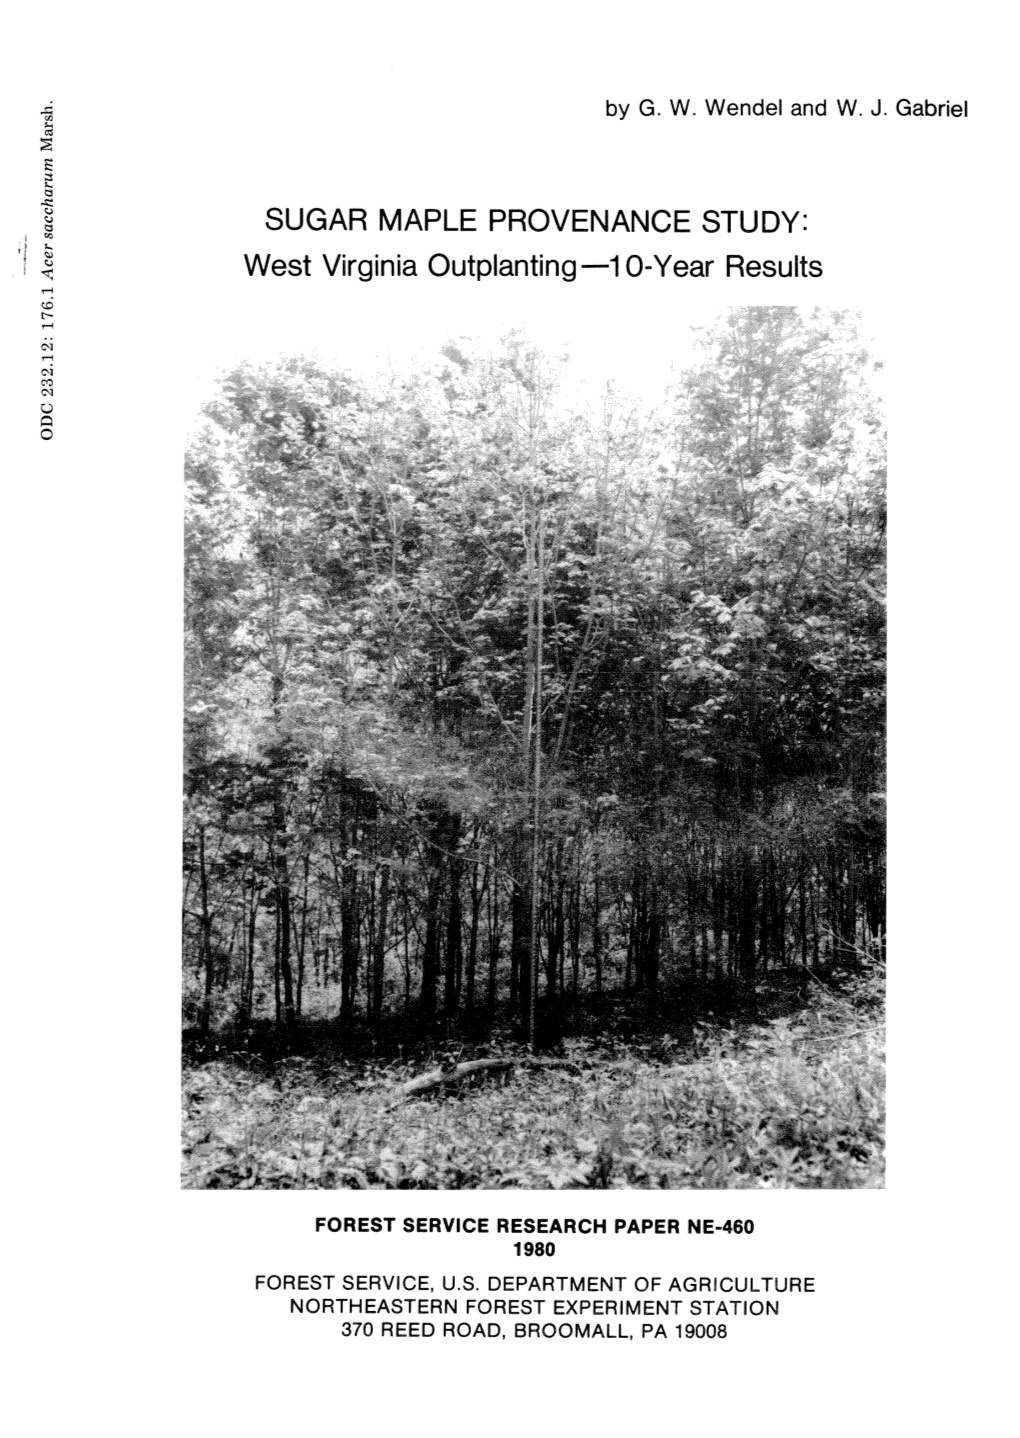 SUGAR MAPLE PROVENANCE STUDY: West Virginia Outplanting -1 0-Year Results